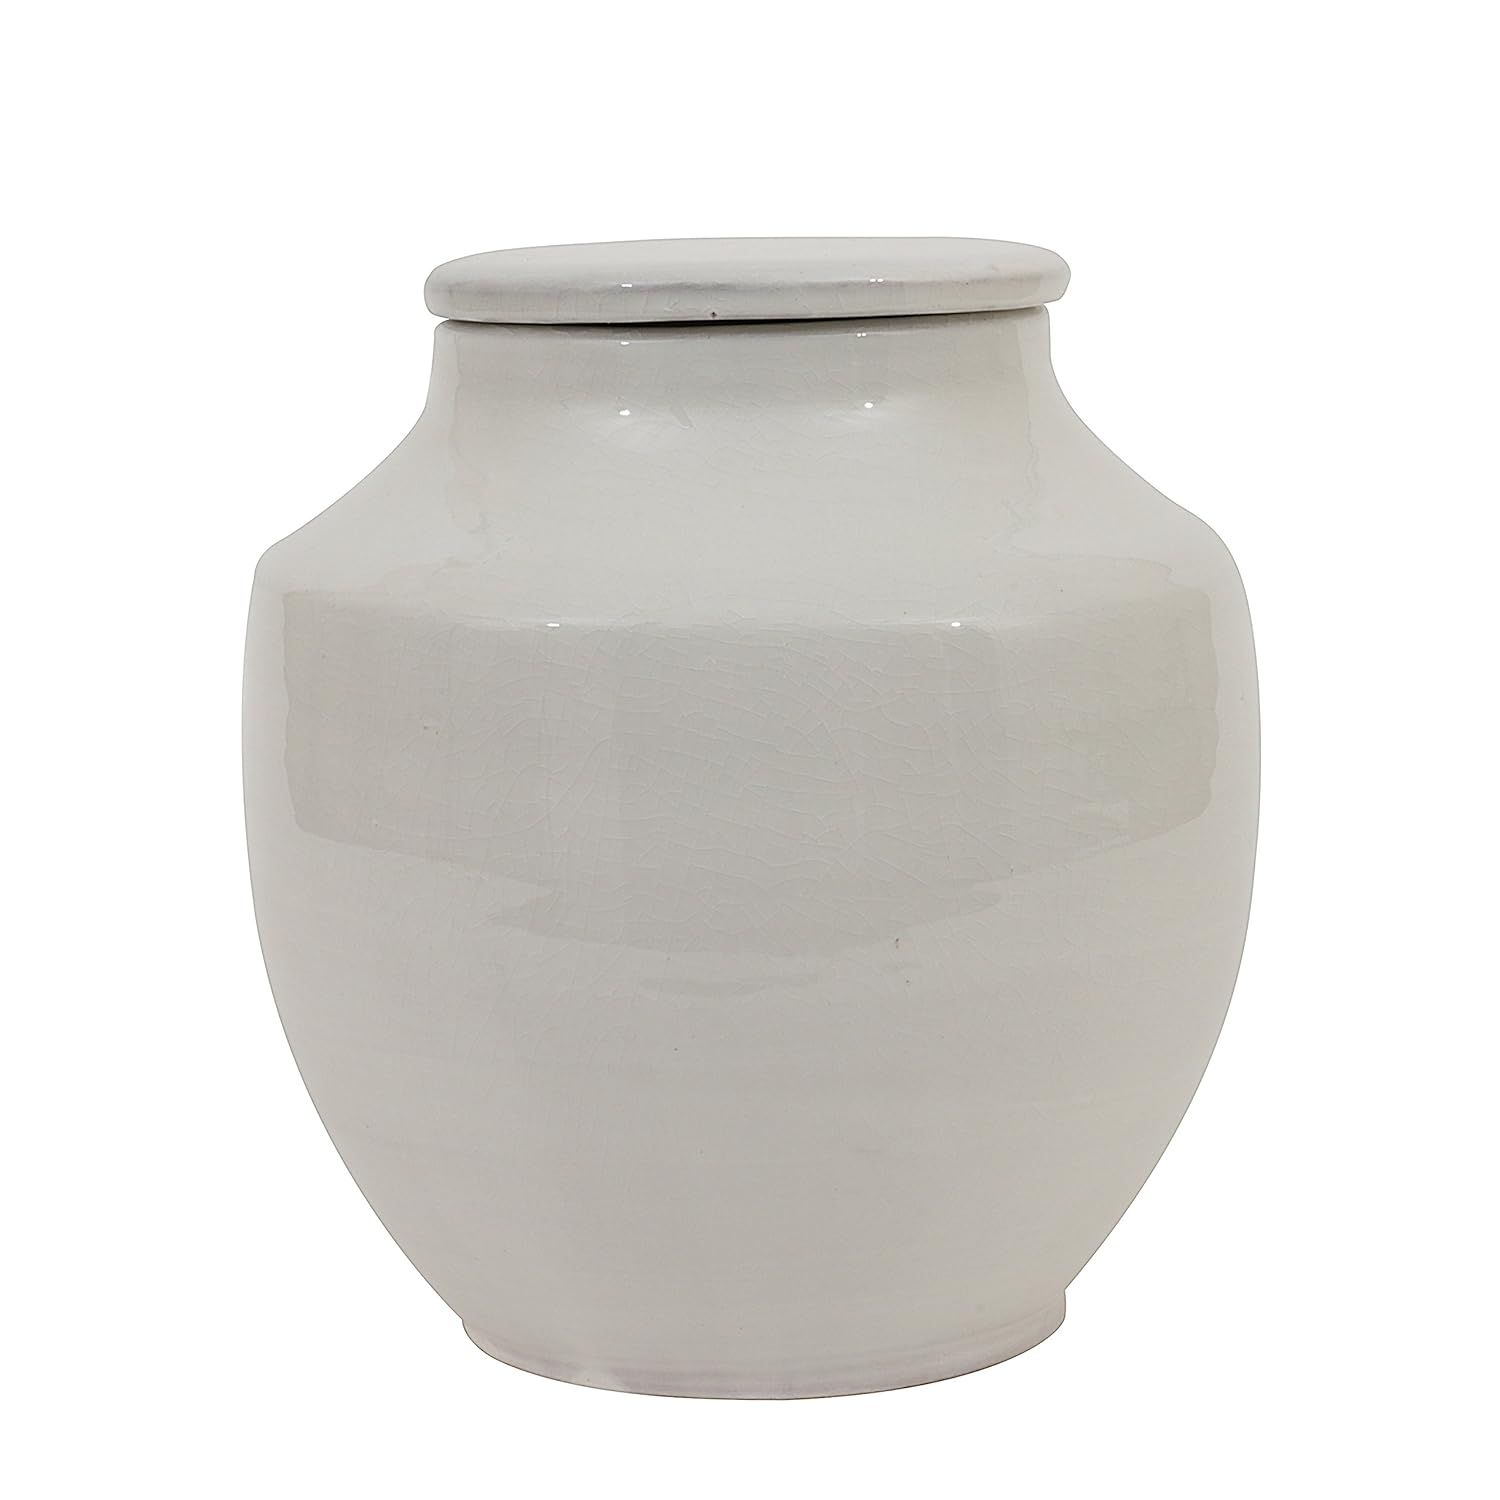 Creative Co-Op Small Round White Terracotta Cachepot, 8 Inch | Amazon (US)